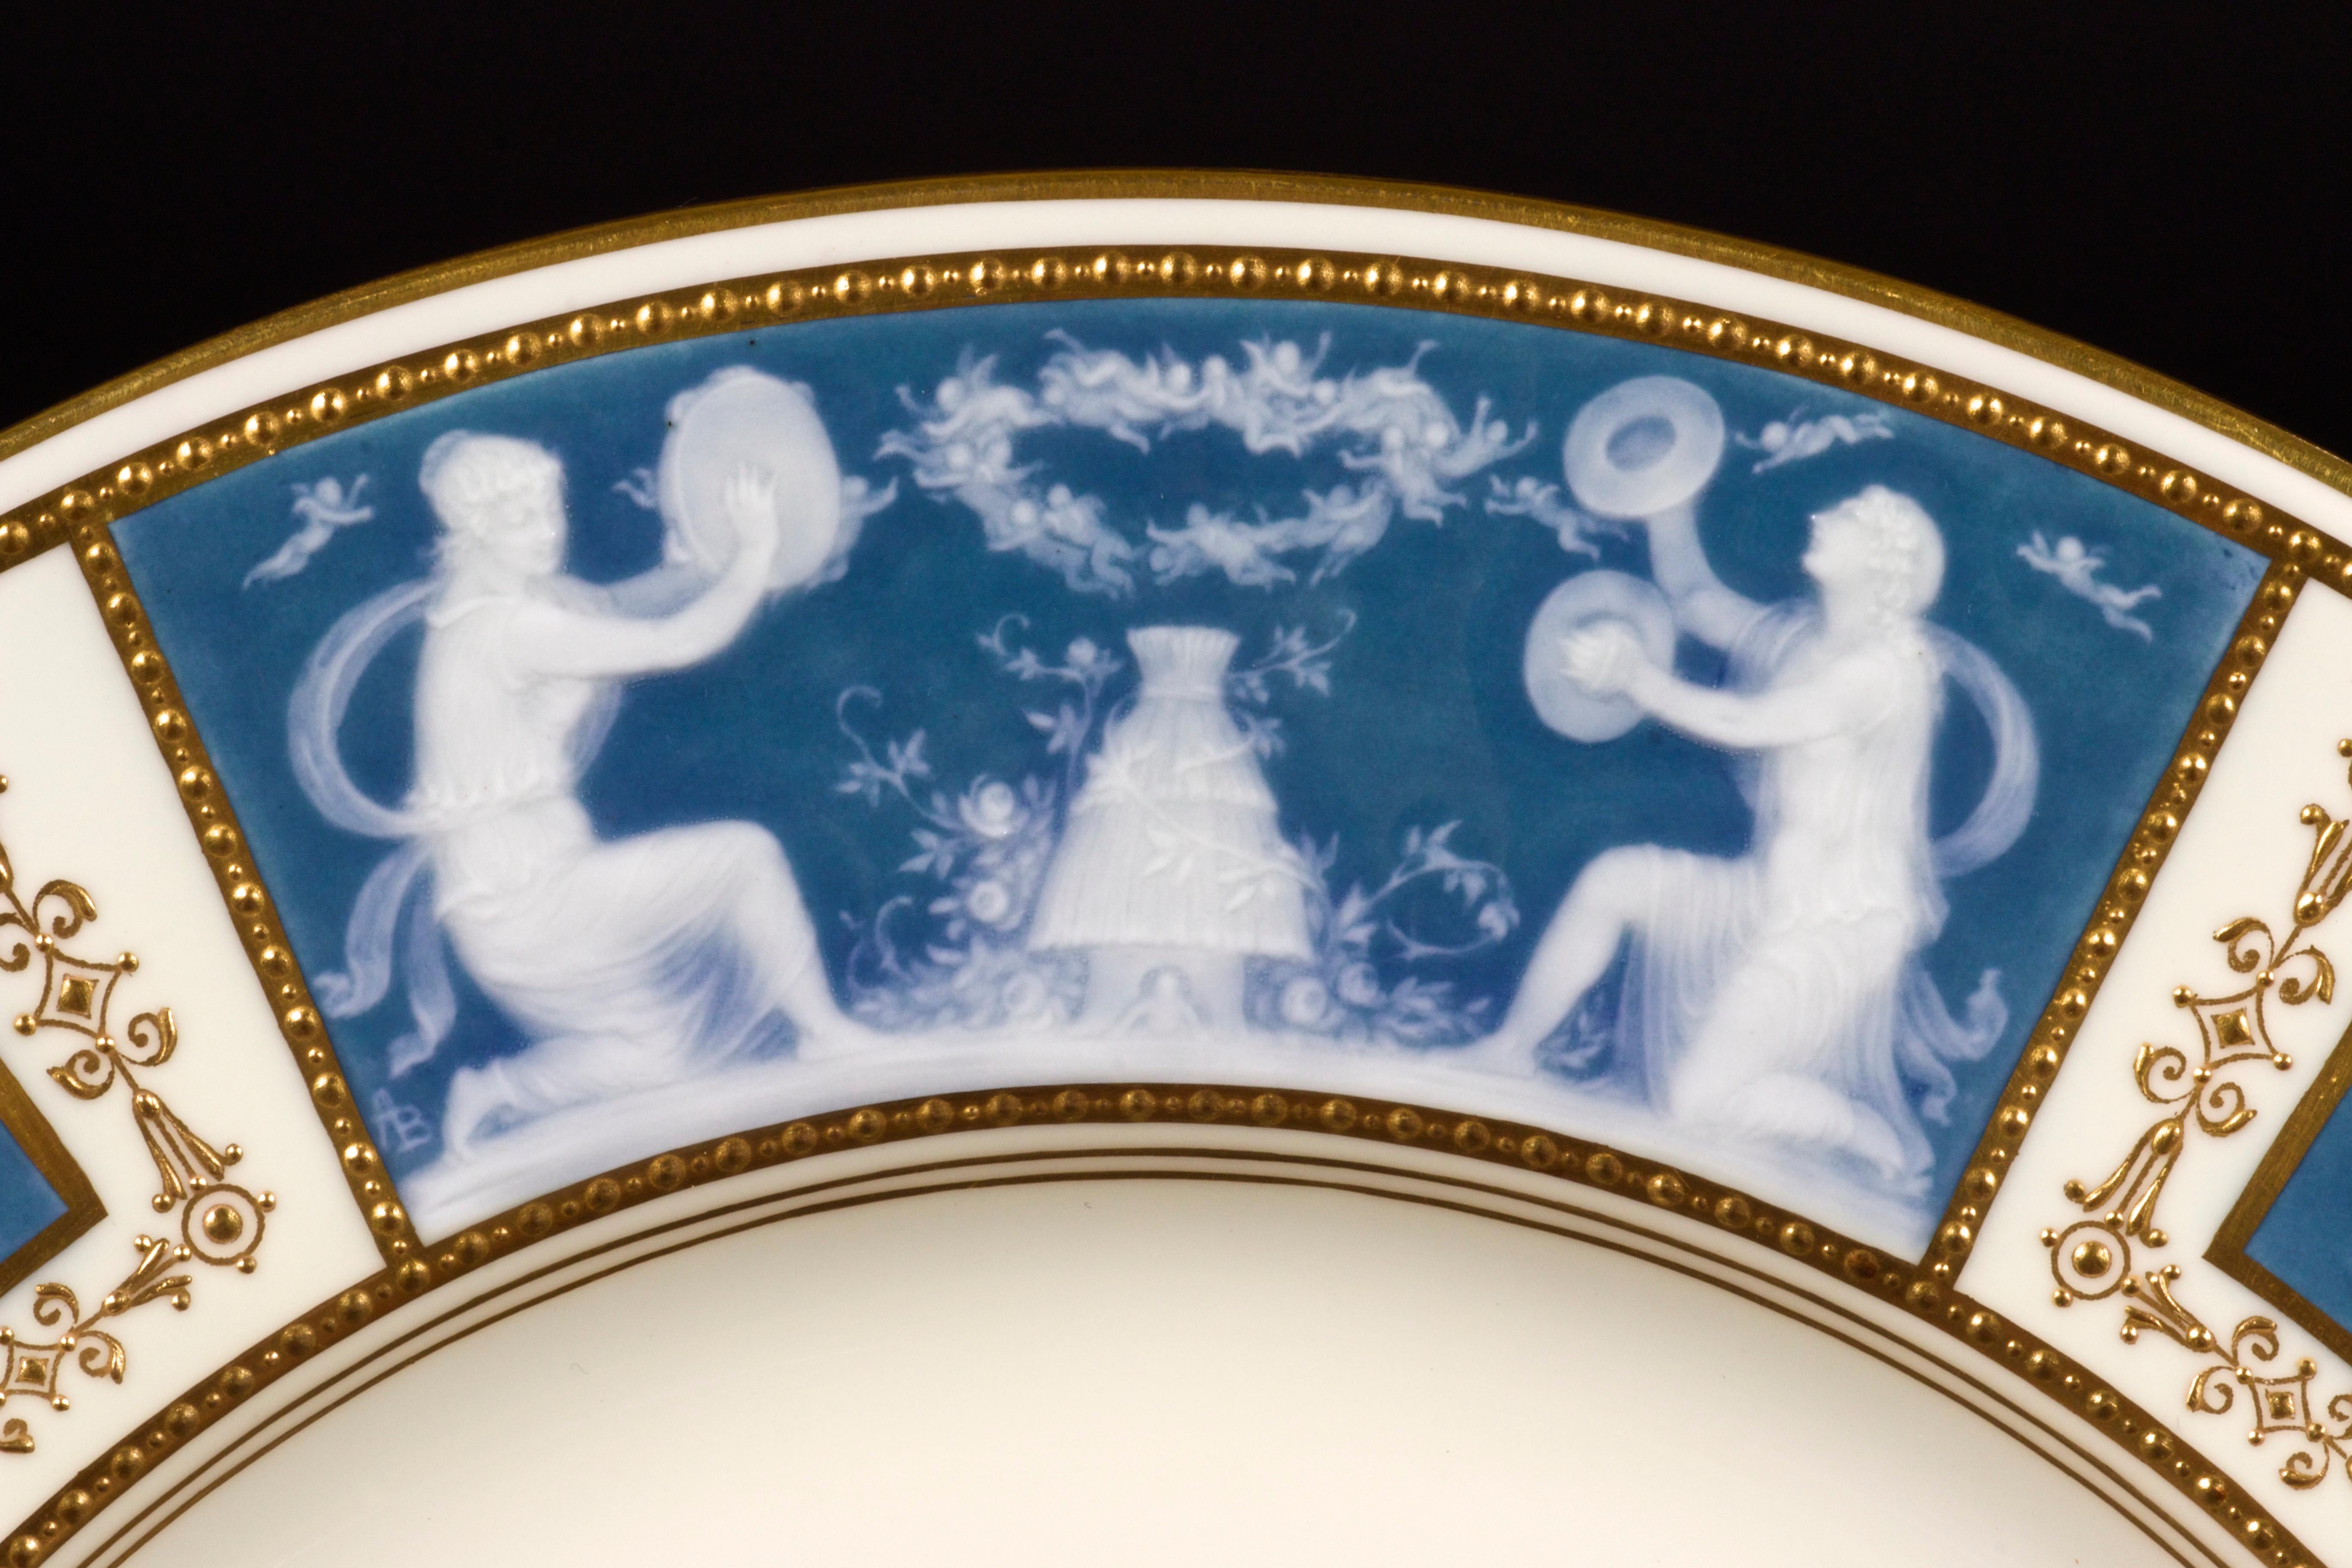 Hand-Crafted 8 Minton Pate-sur-pate Blue Plates for Tiffany, by Artist Albion Birks